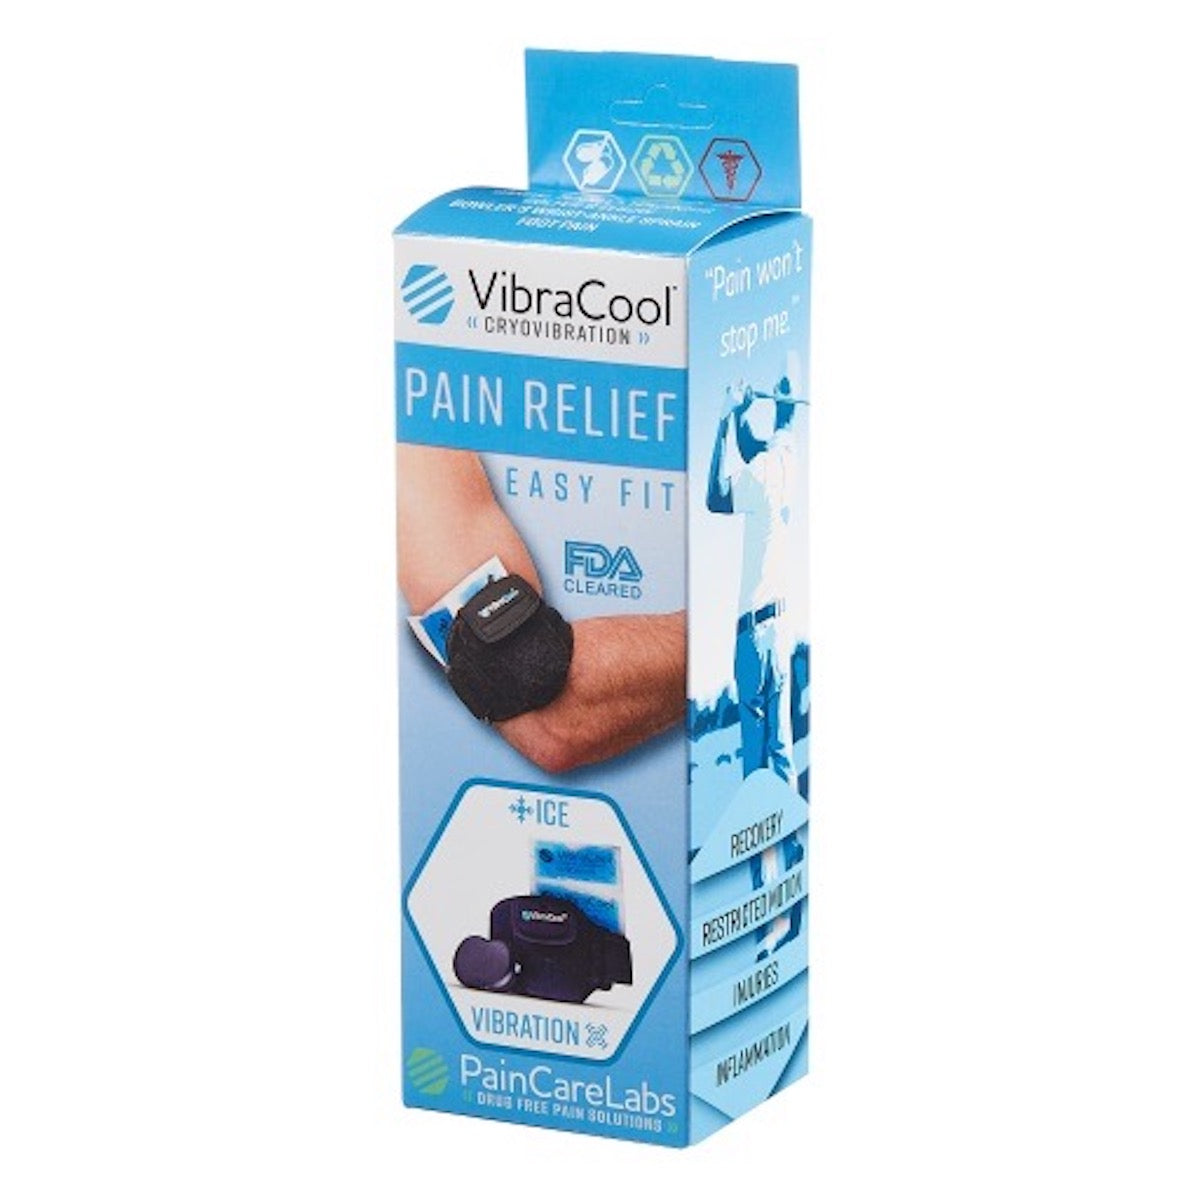 Vibracool Easy Fit Innovative Nervous System Pain Reliever